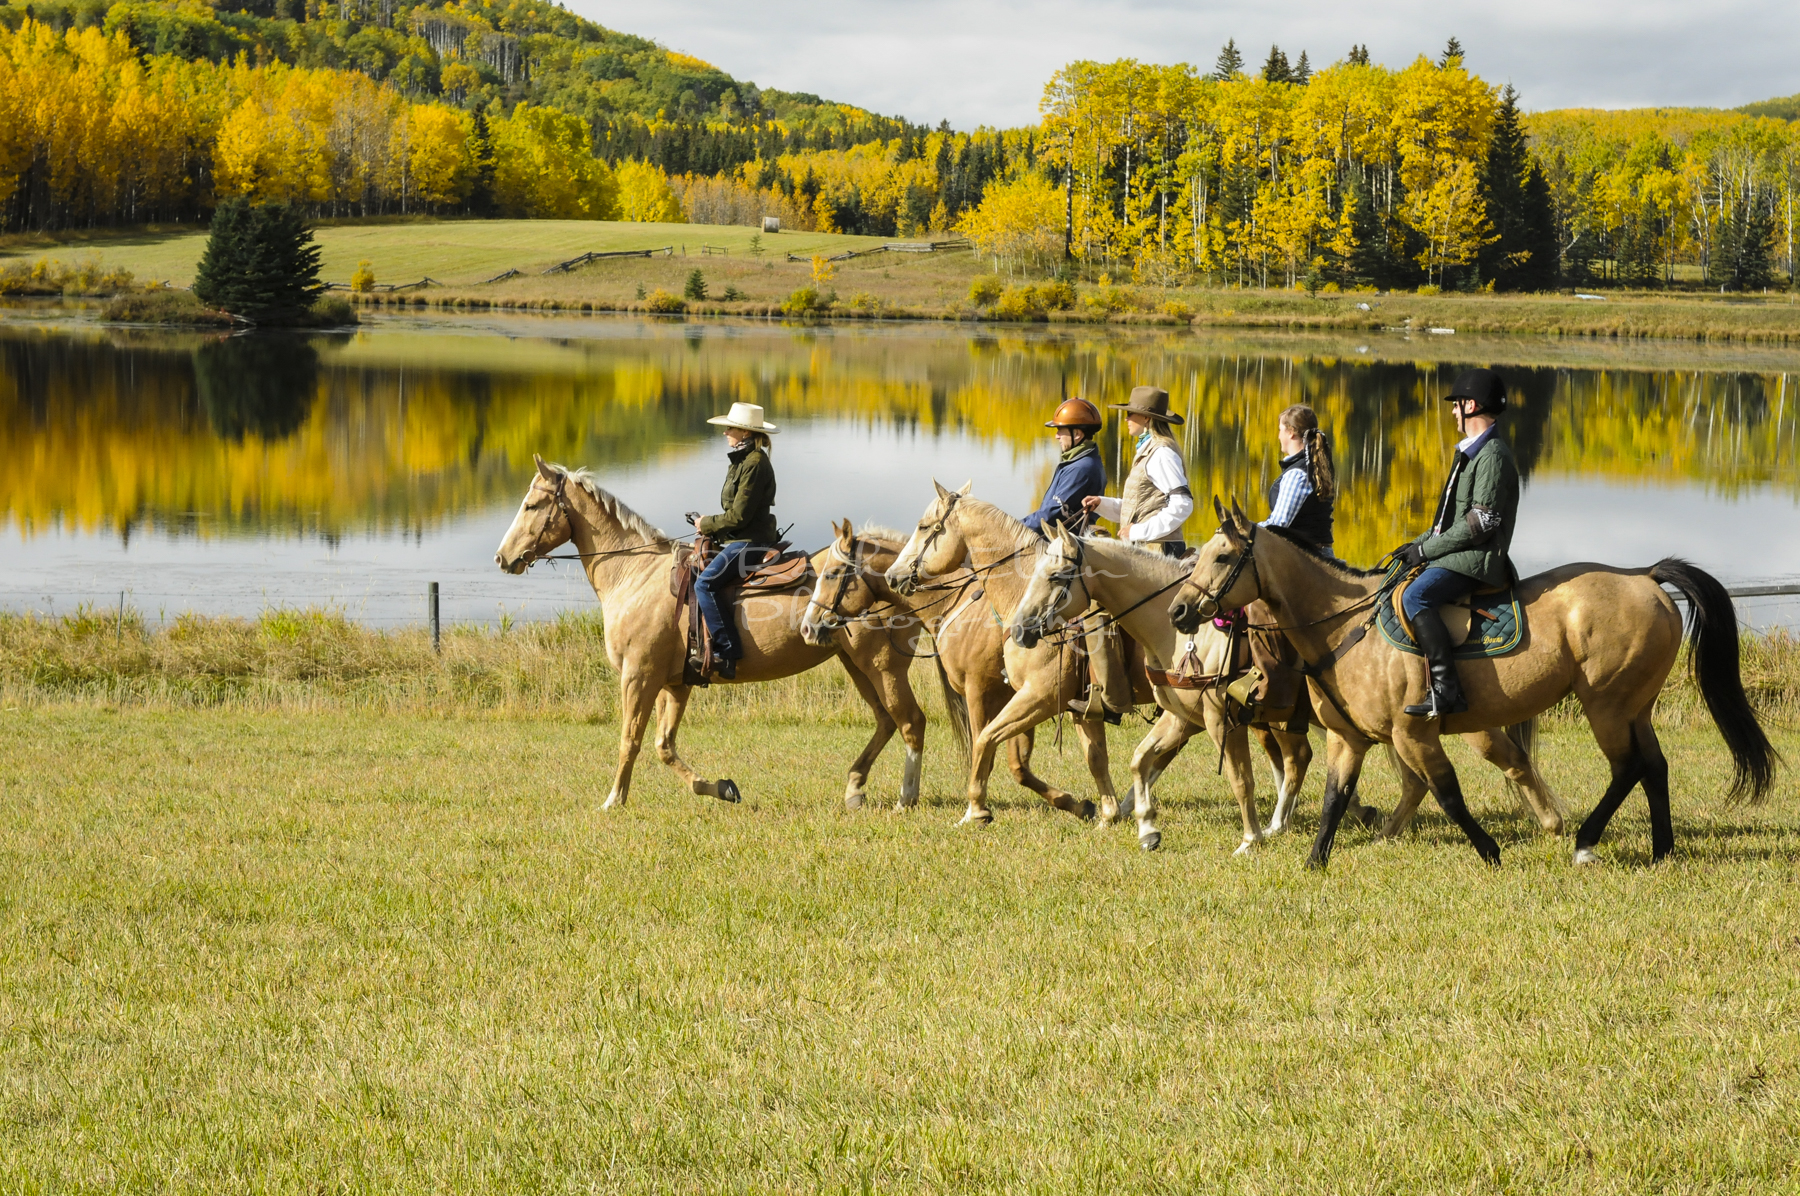 Horseback riding in the Foothills